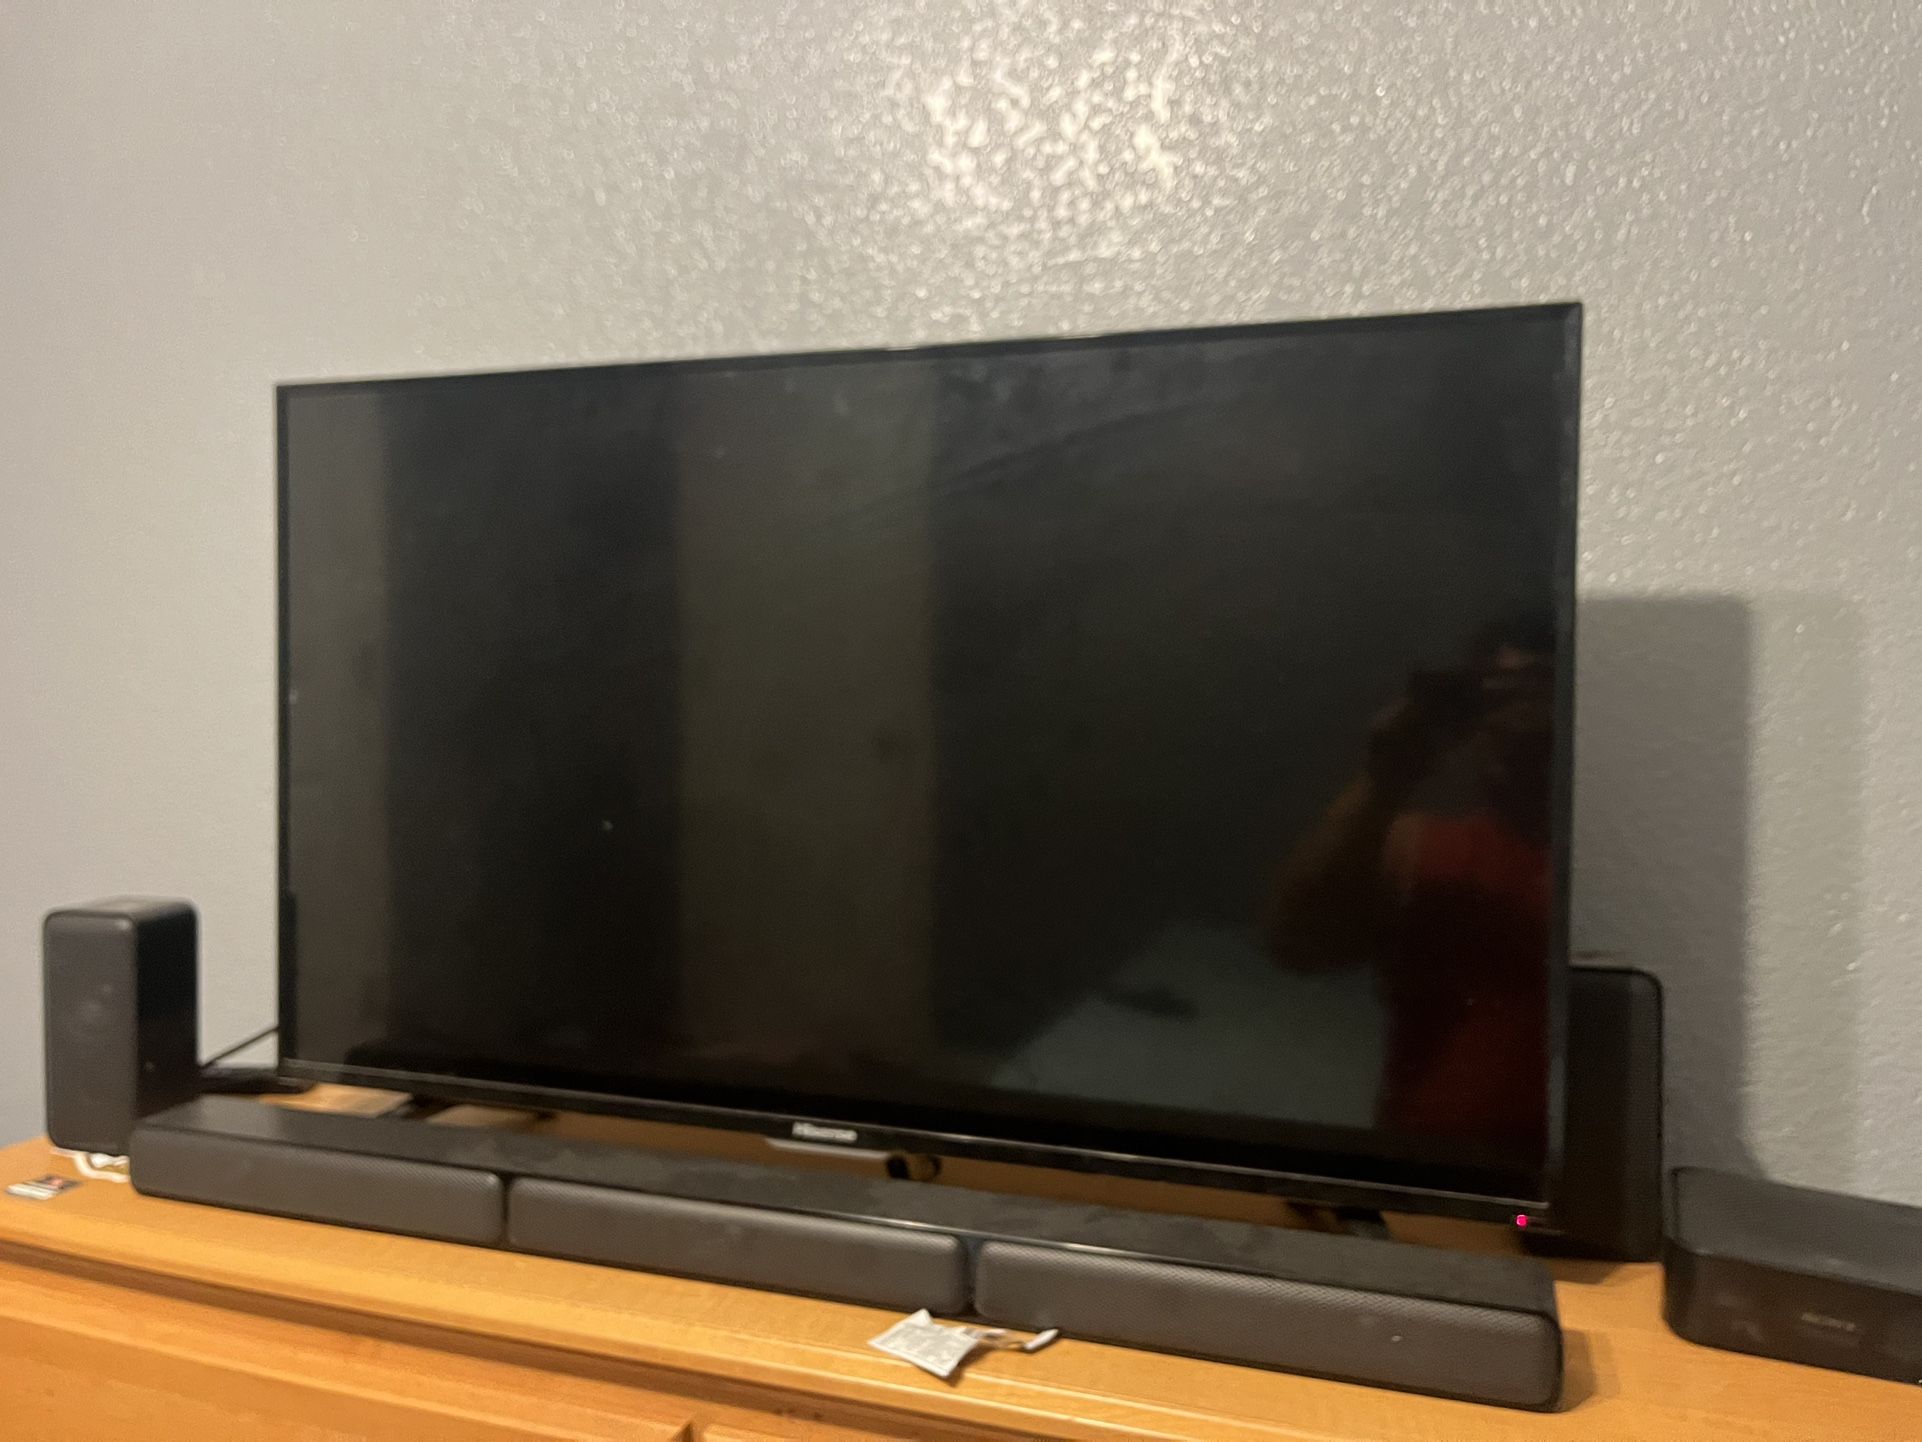 Hisense Tv With Sony Sound Bar Surround Sound Speakers And Sub